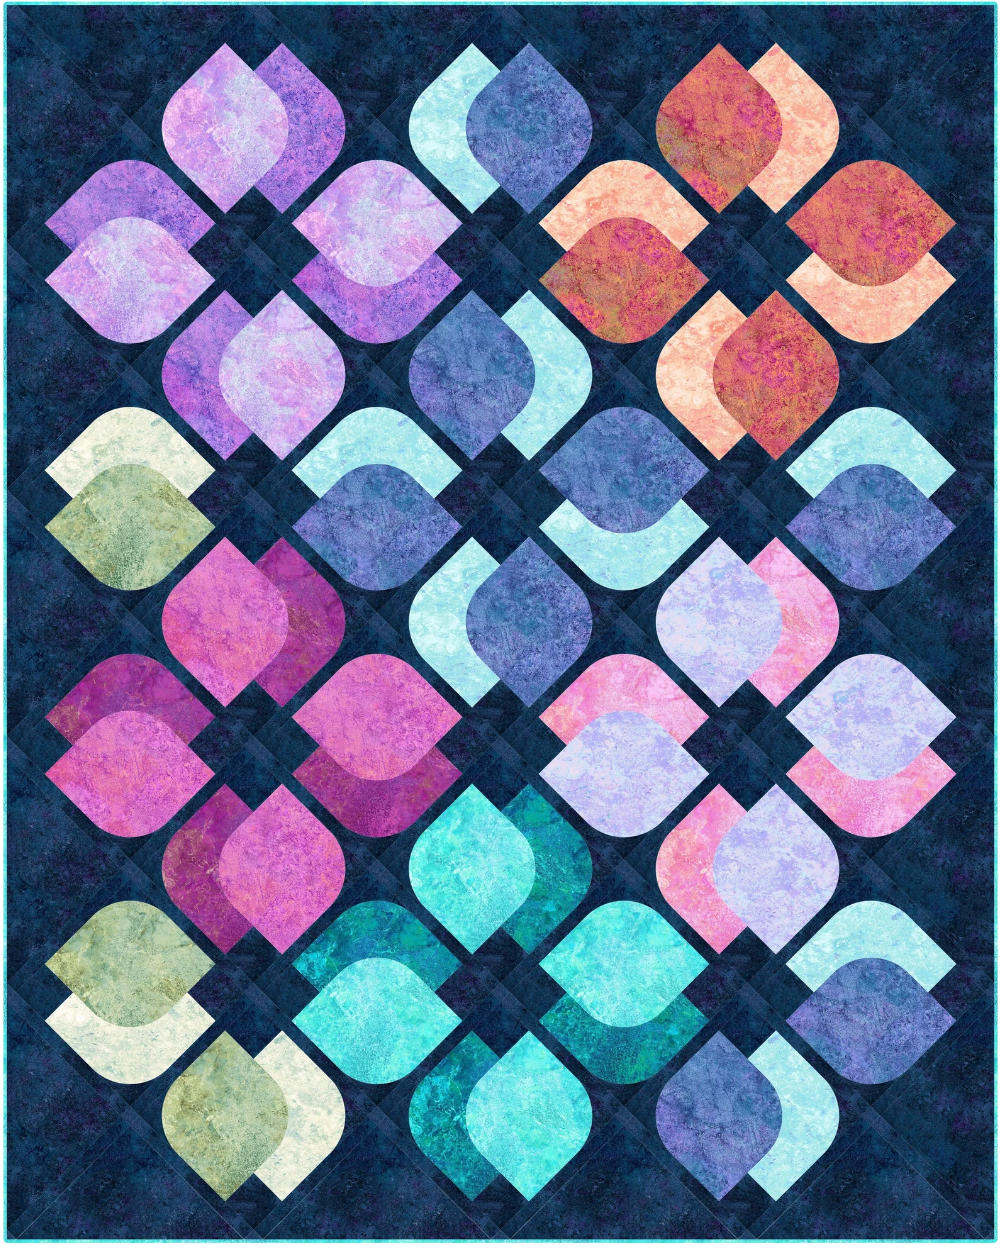 Floating Flowers Quilt Kit - 74" x 92"